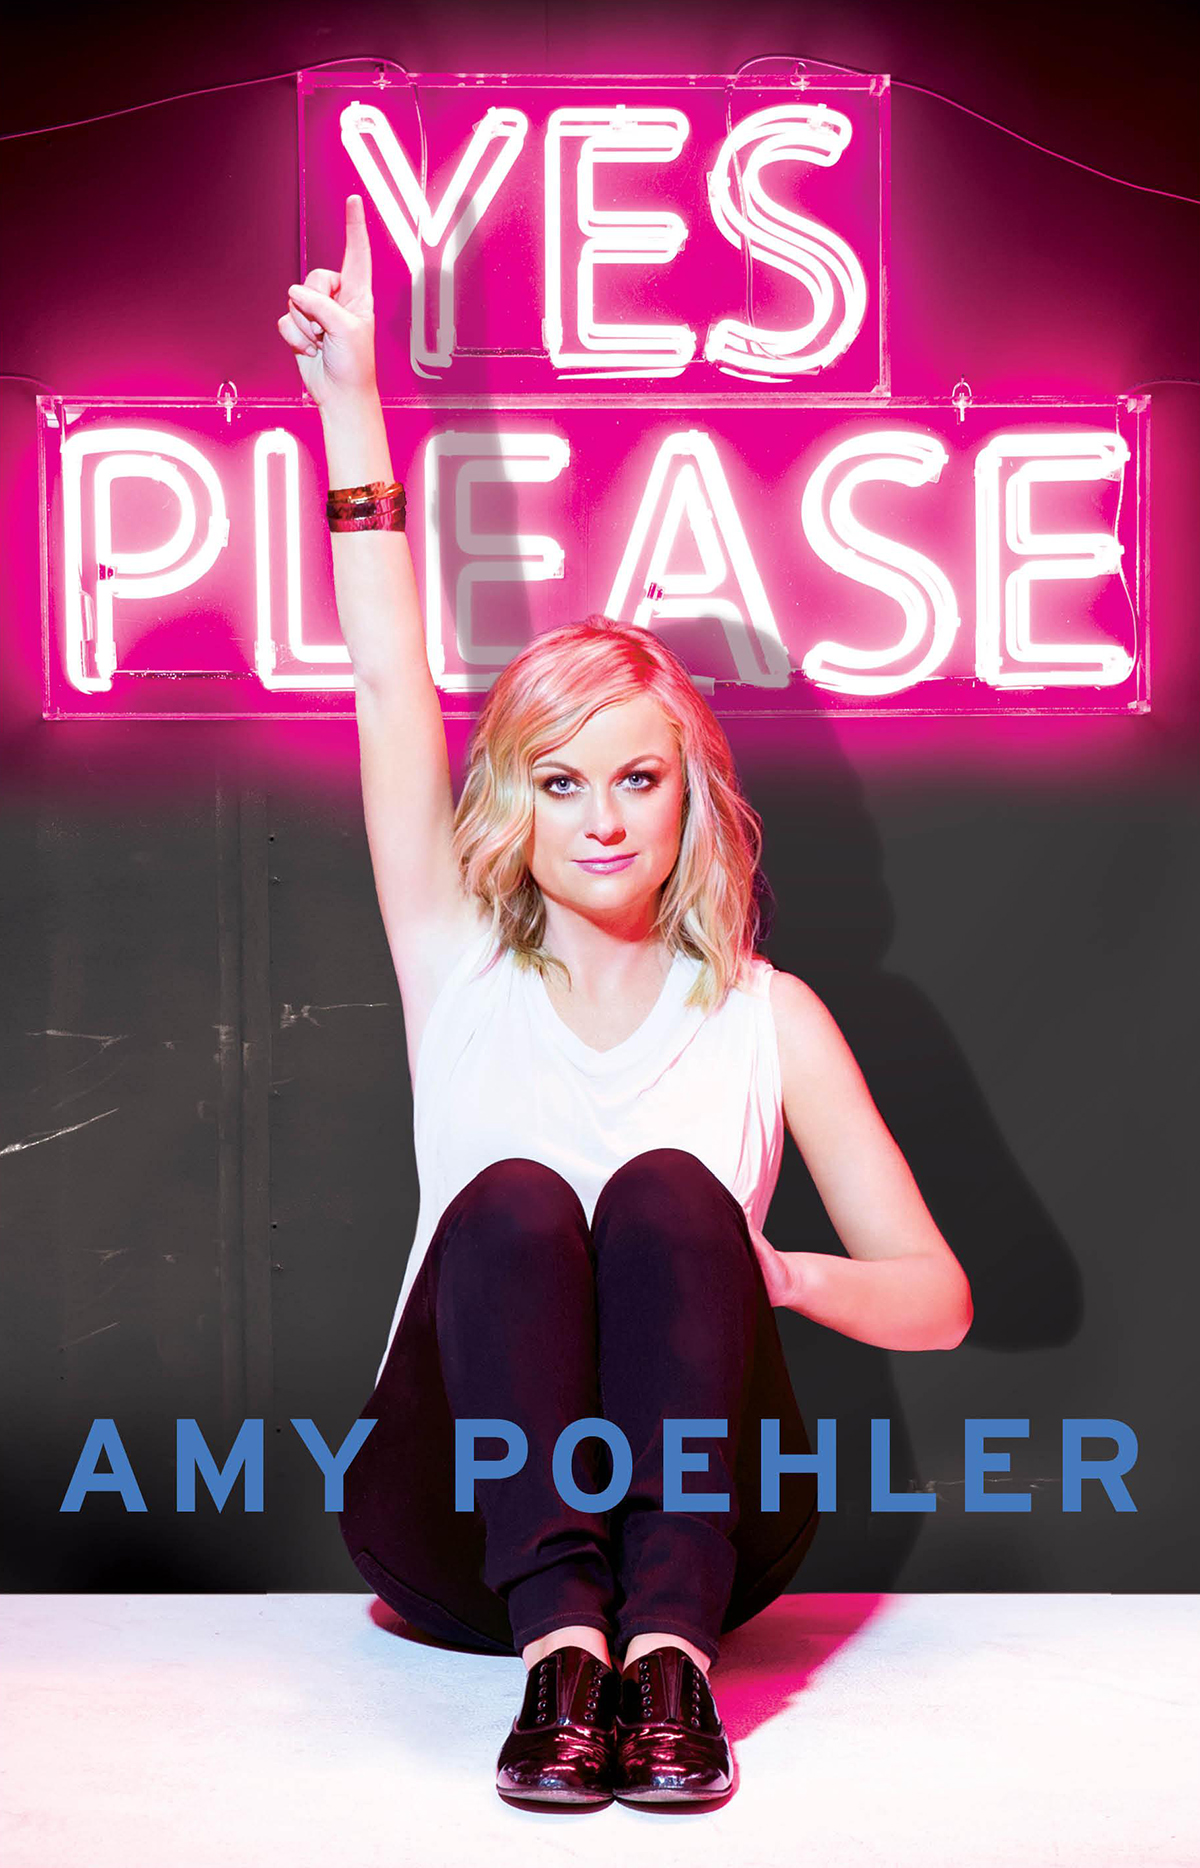 amy-poehler-yes-please-book-cover.jpg